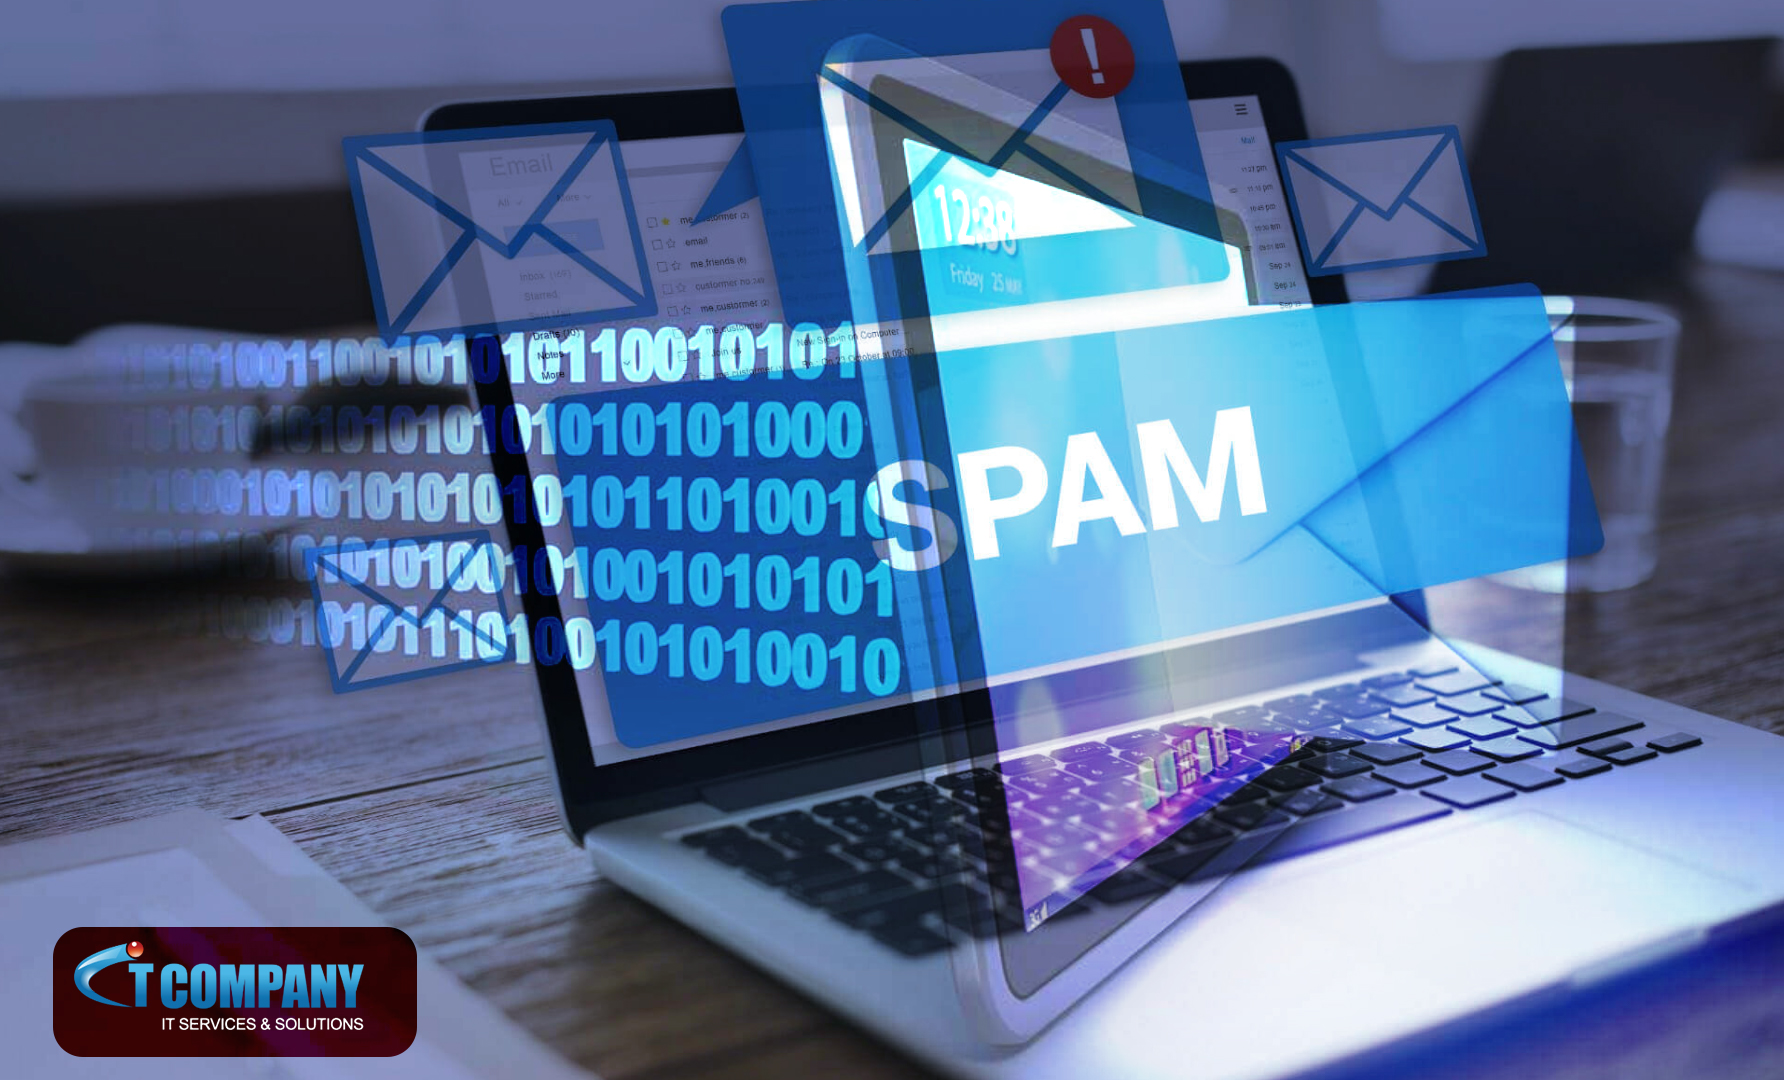 A large portion of your work emails are simply spam